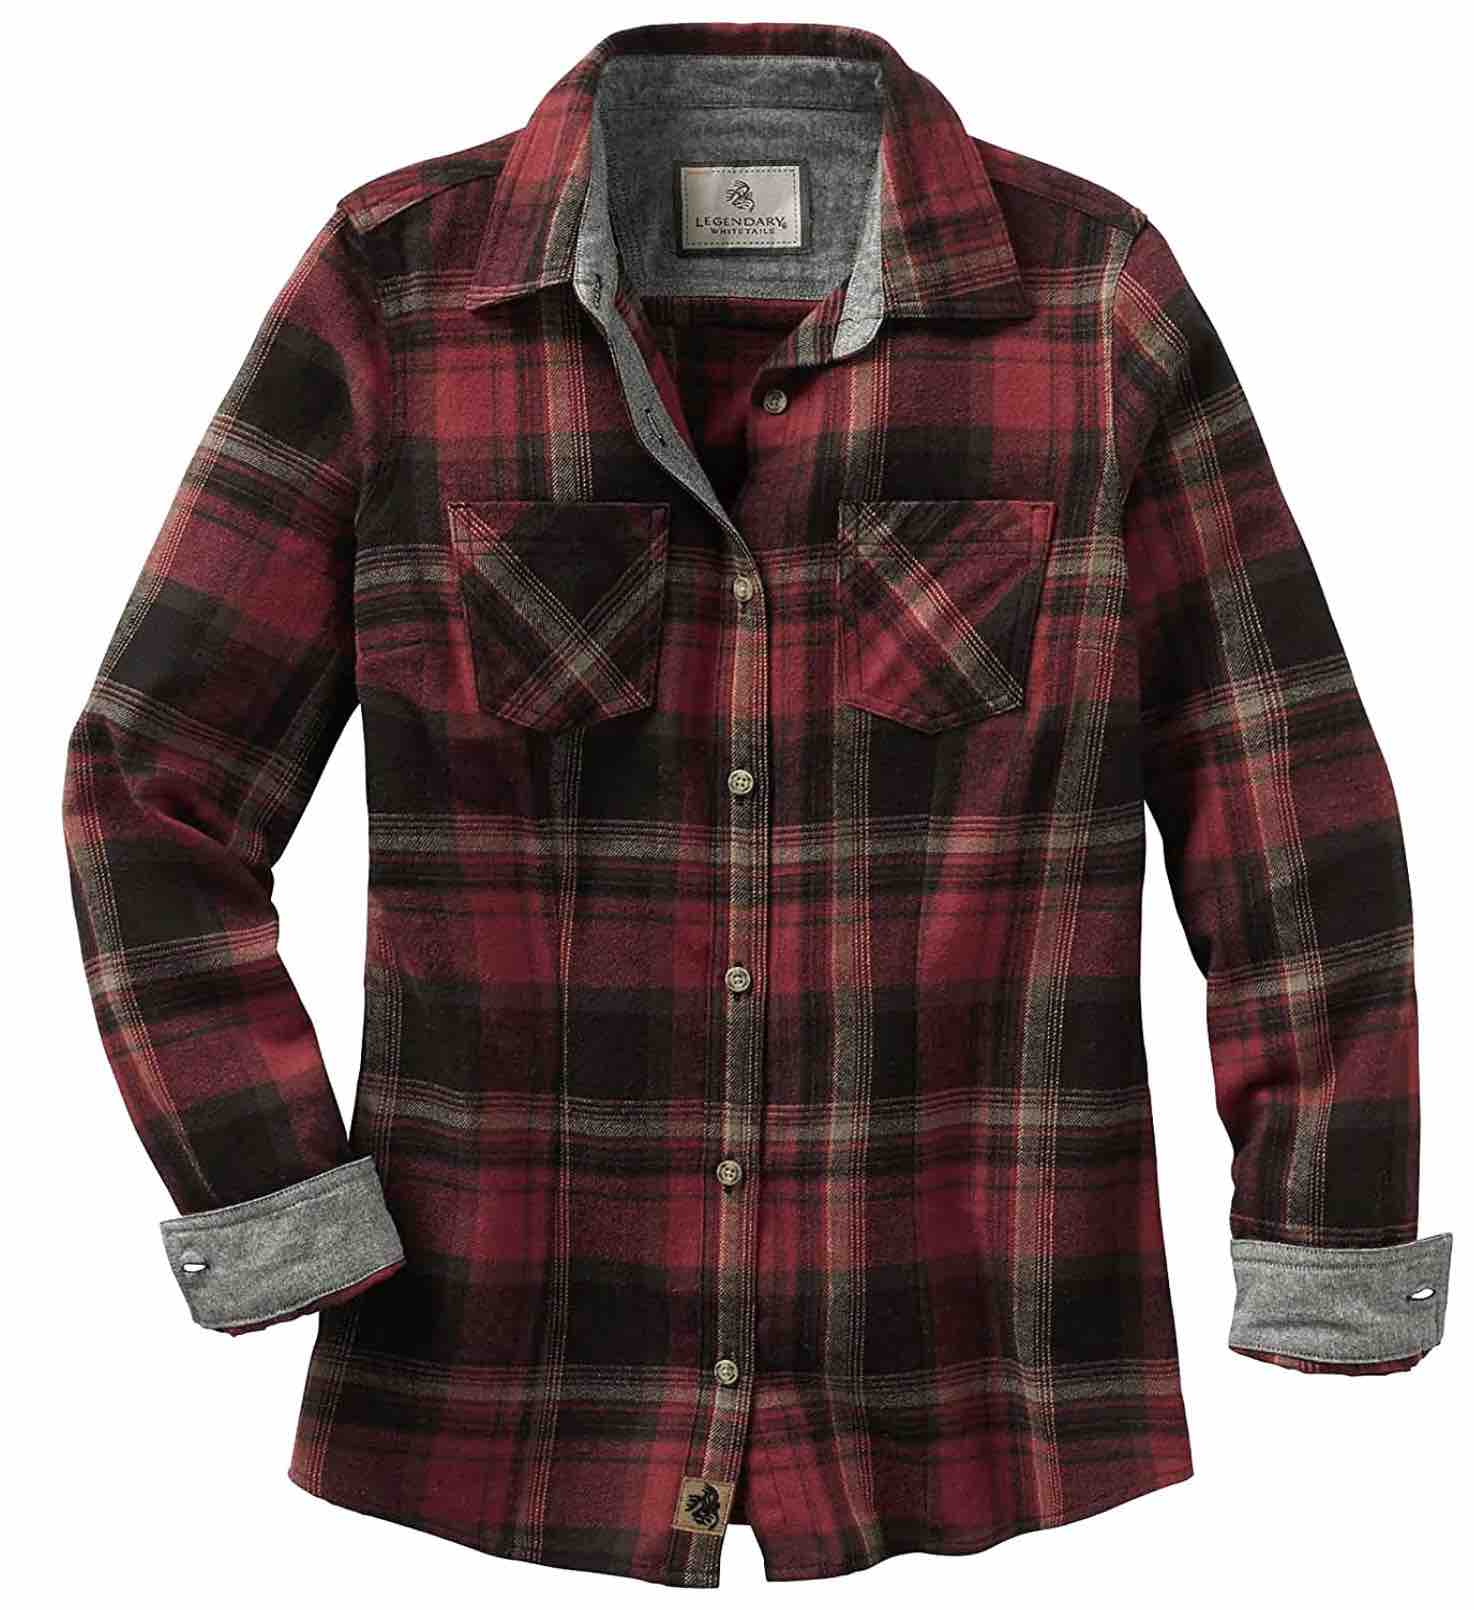 11 Beautiful Women's Flannel Shirts & Tops to Up Your Style